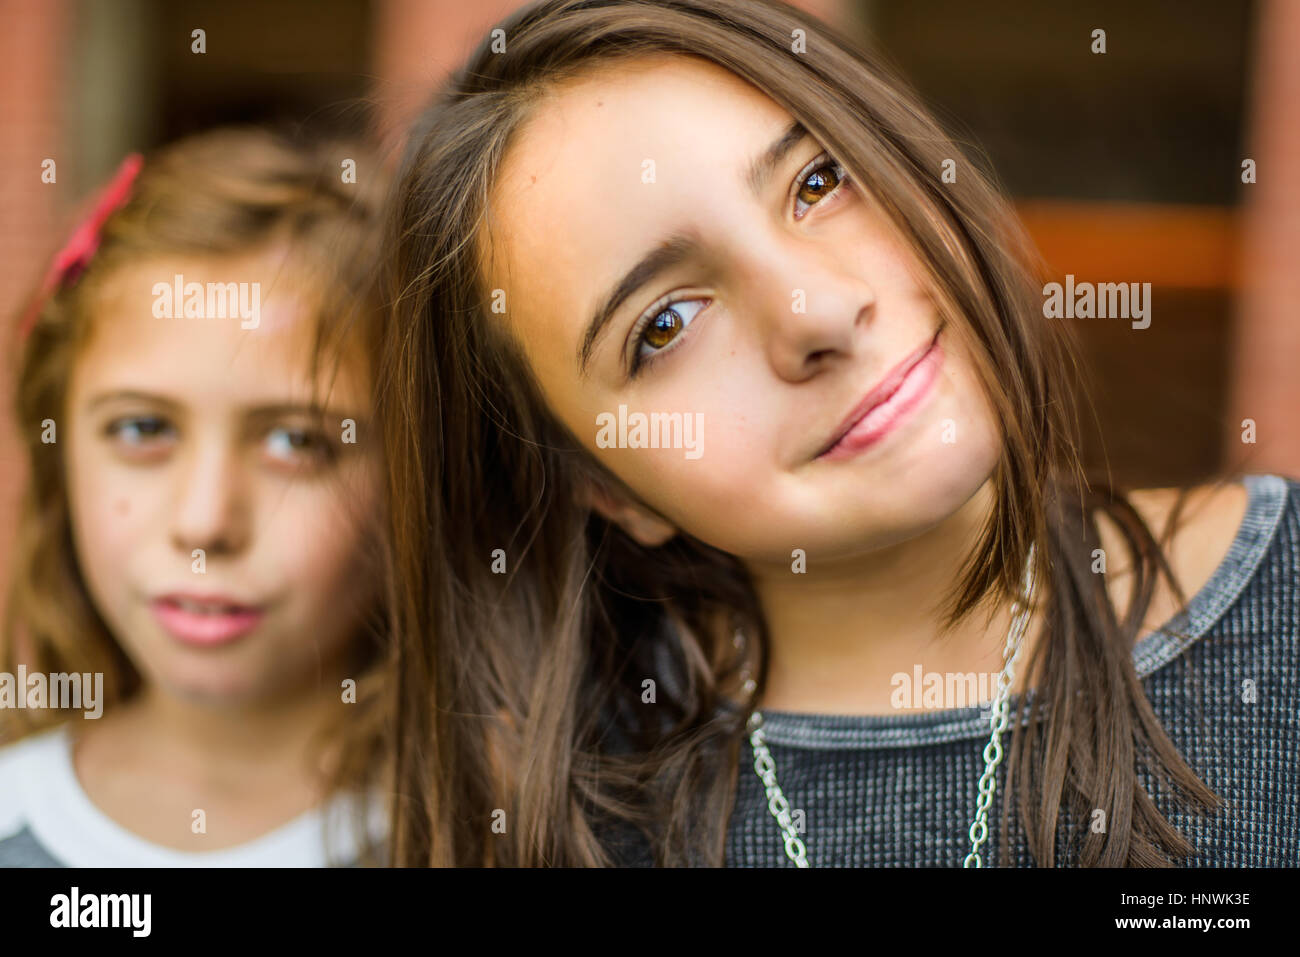 Portrait of confident girl in front of her sister Stock Photo